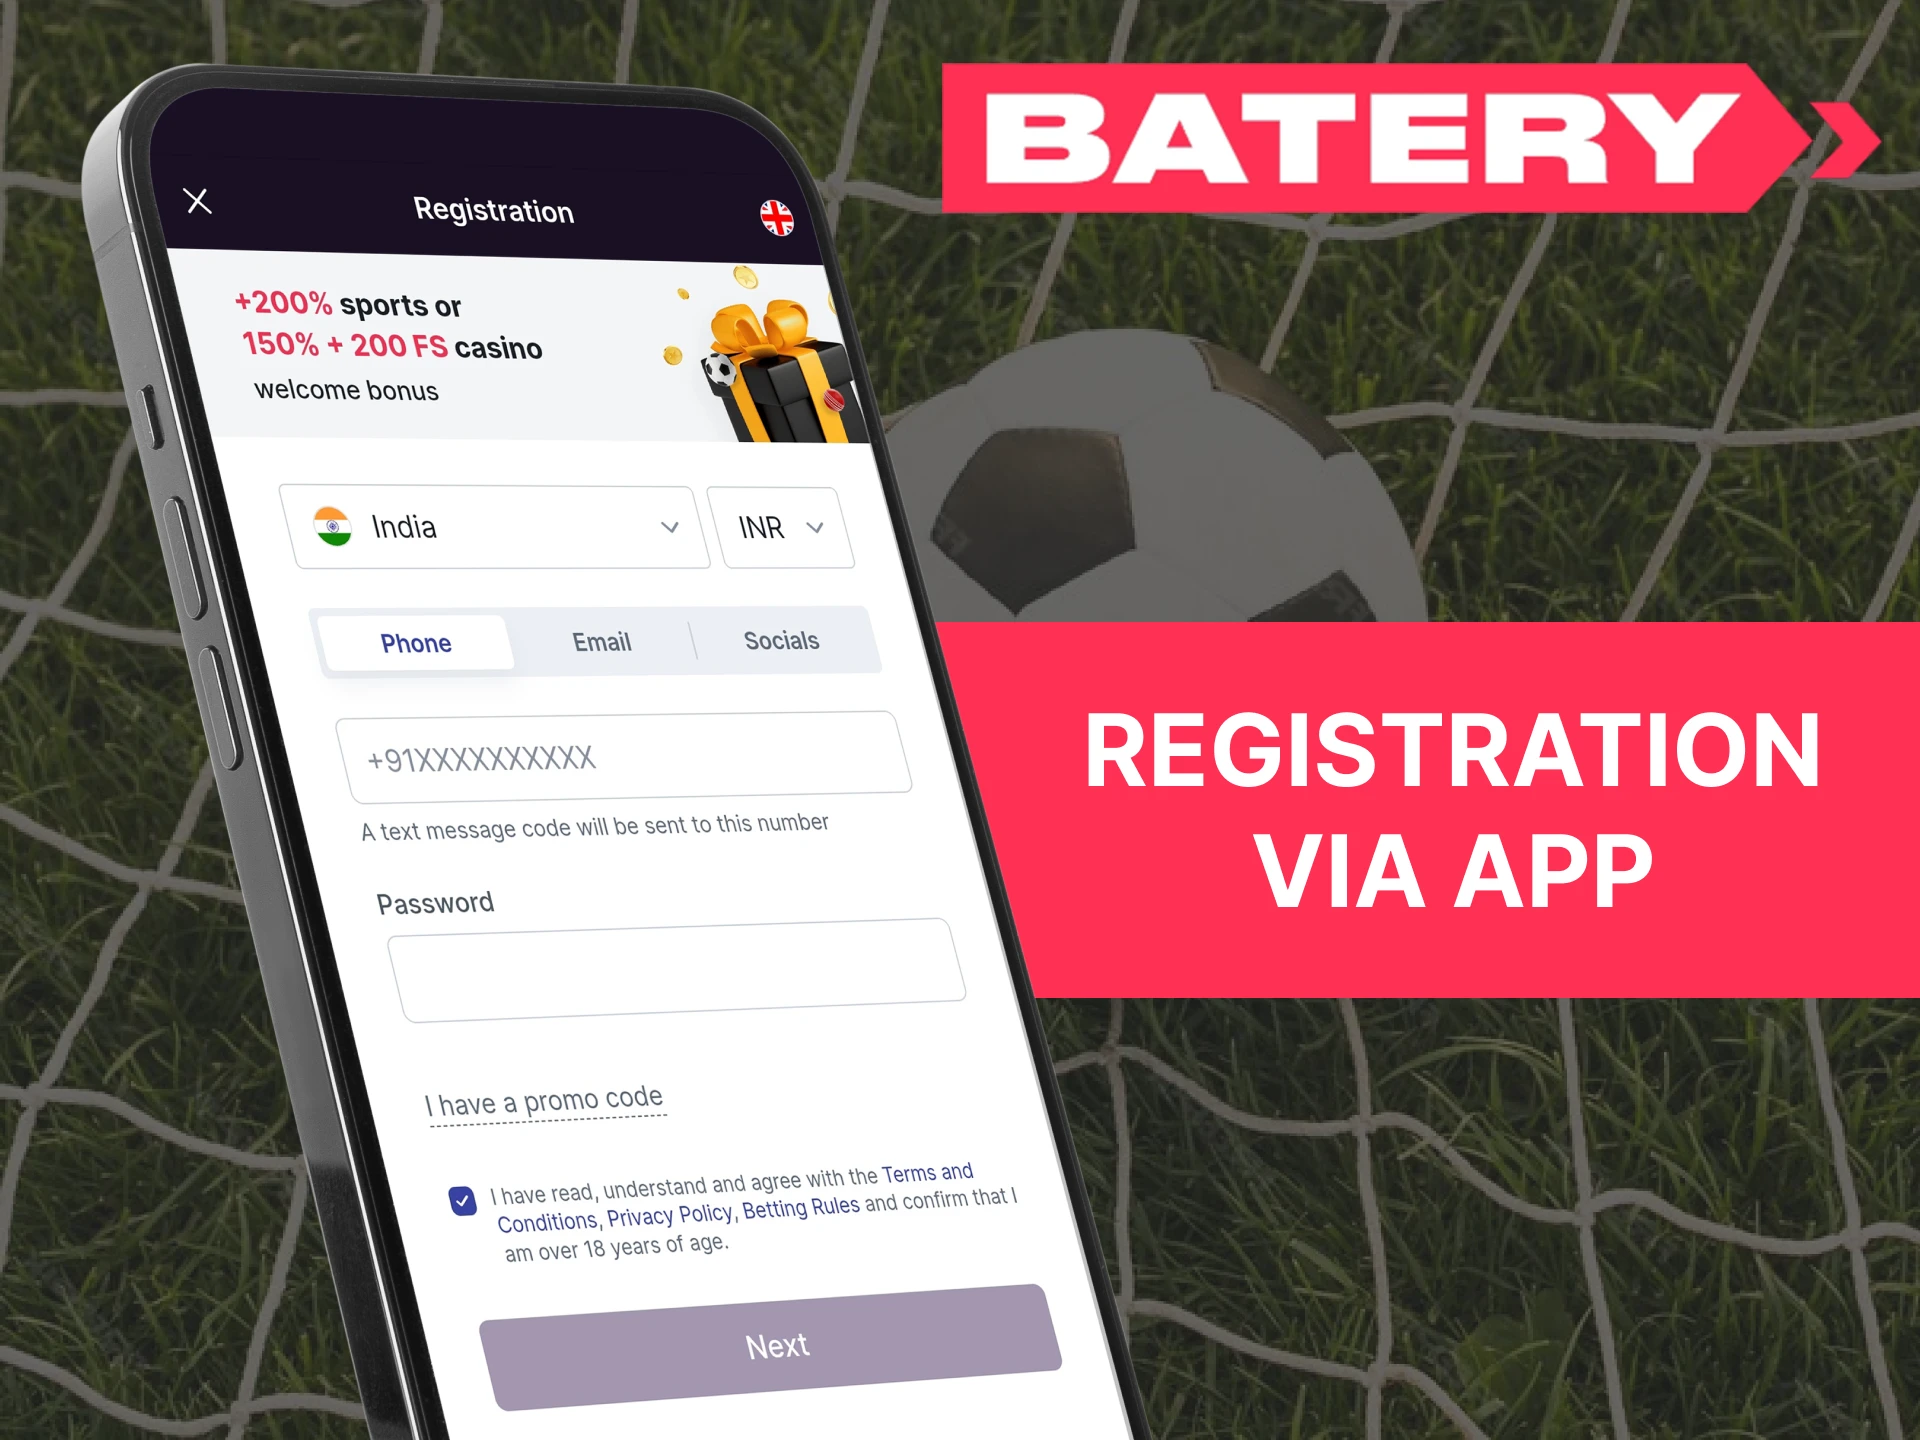 Registration in the Batery mobile application is the same as on the website.